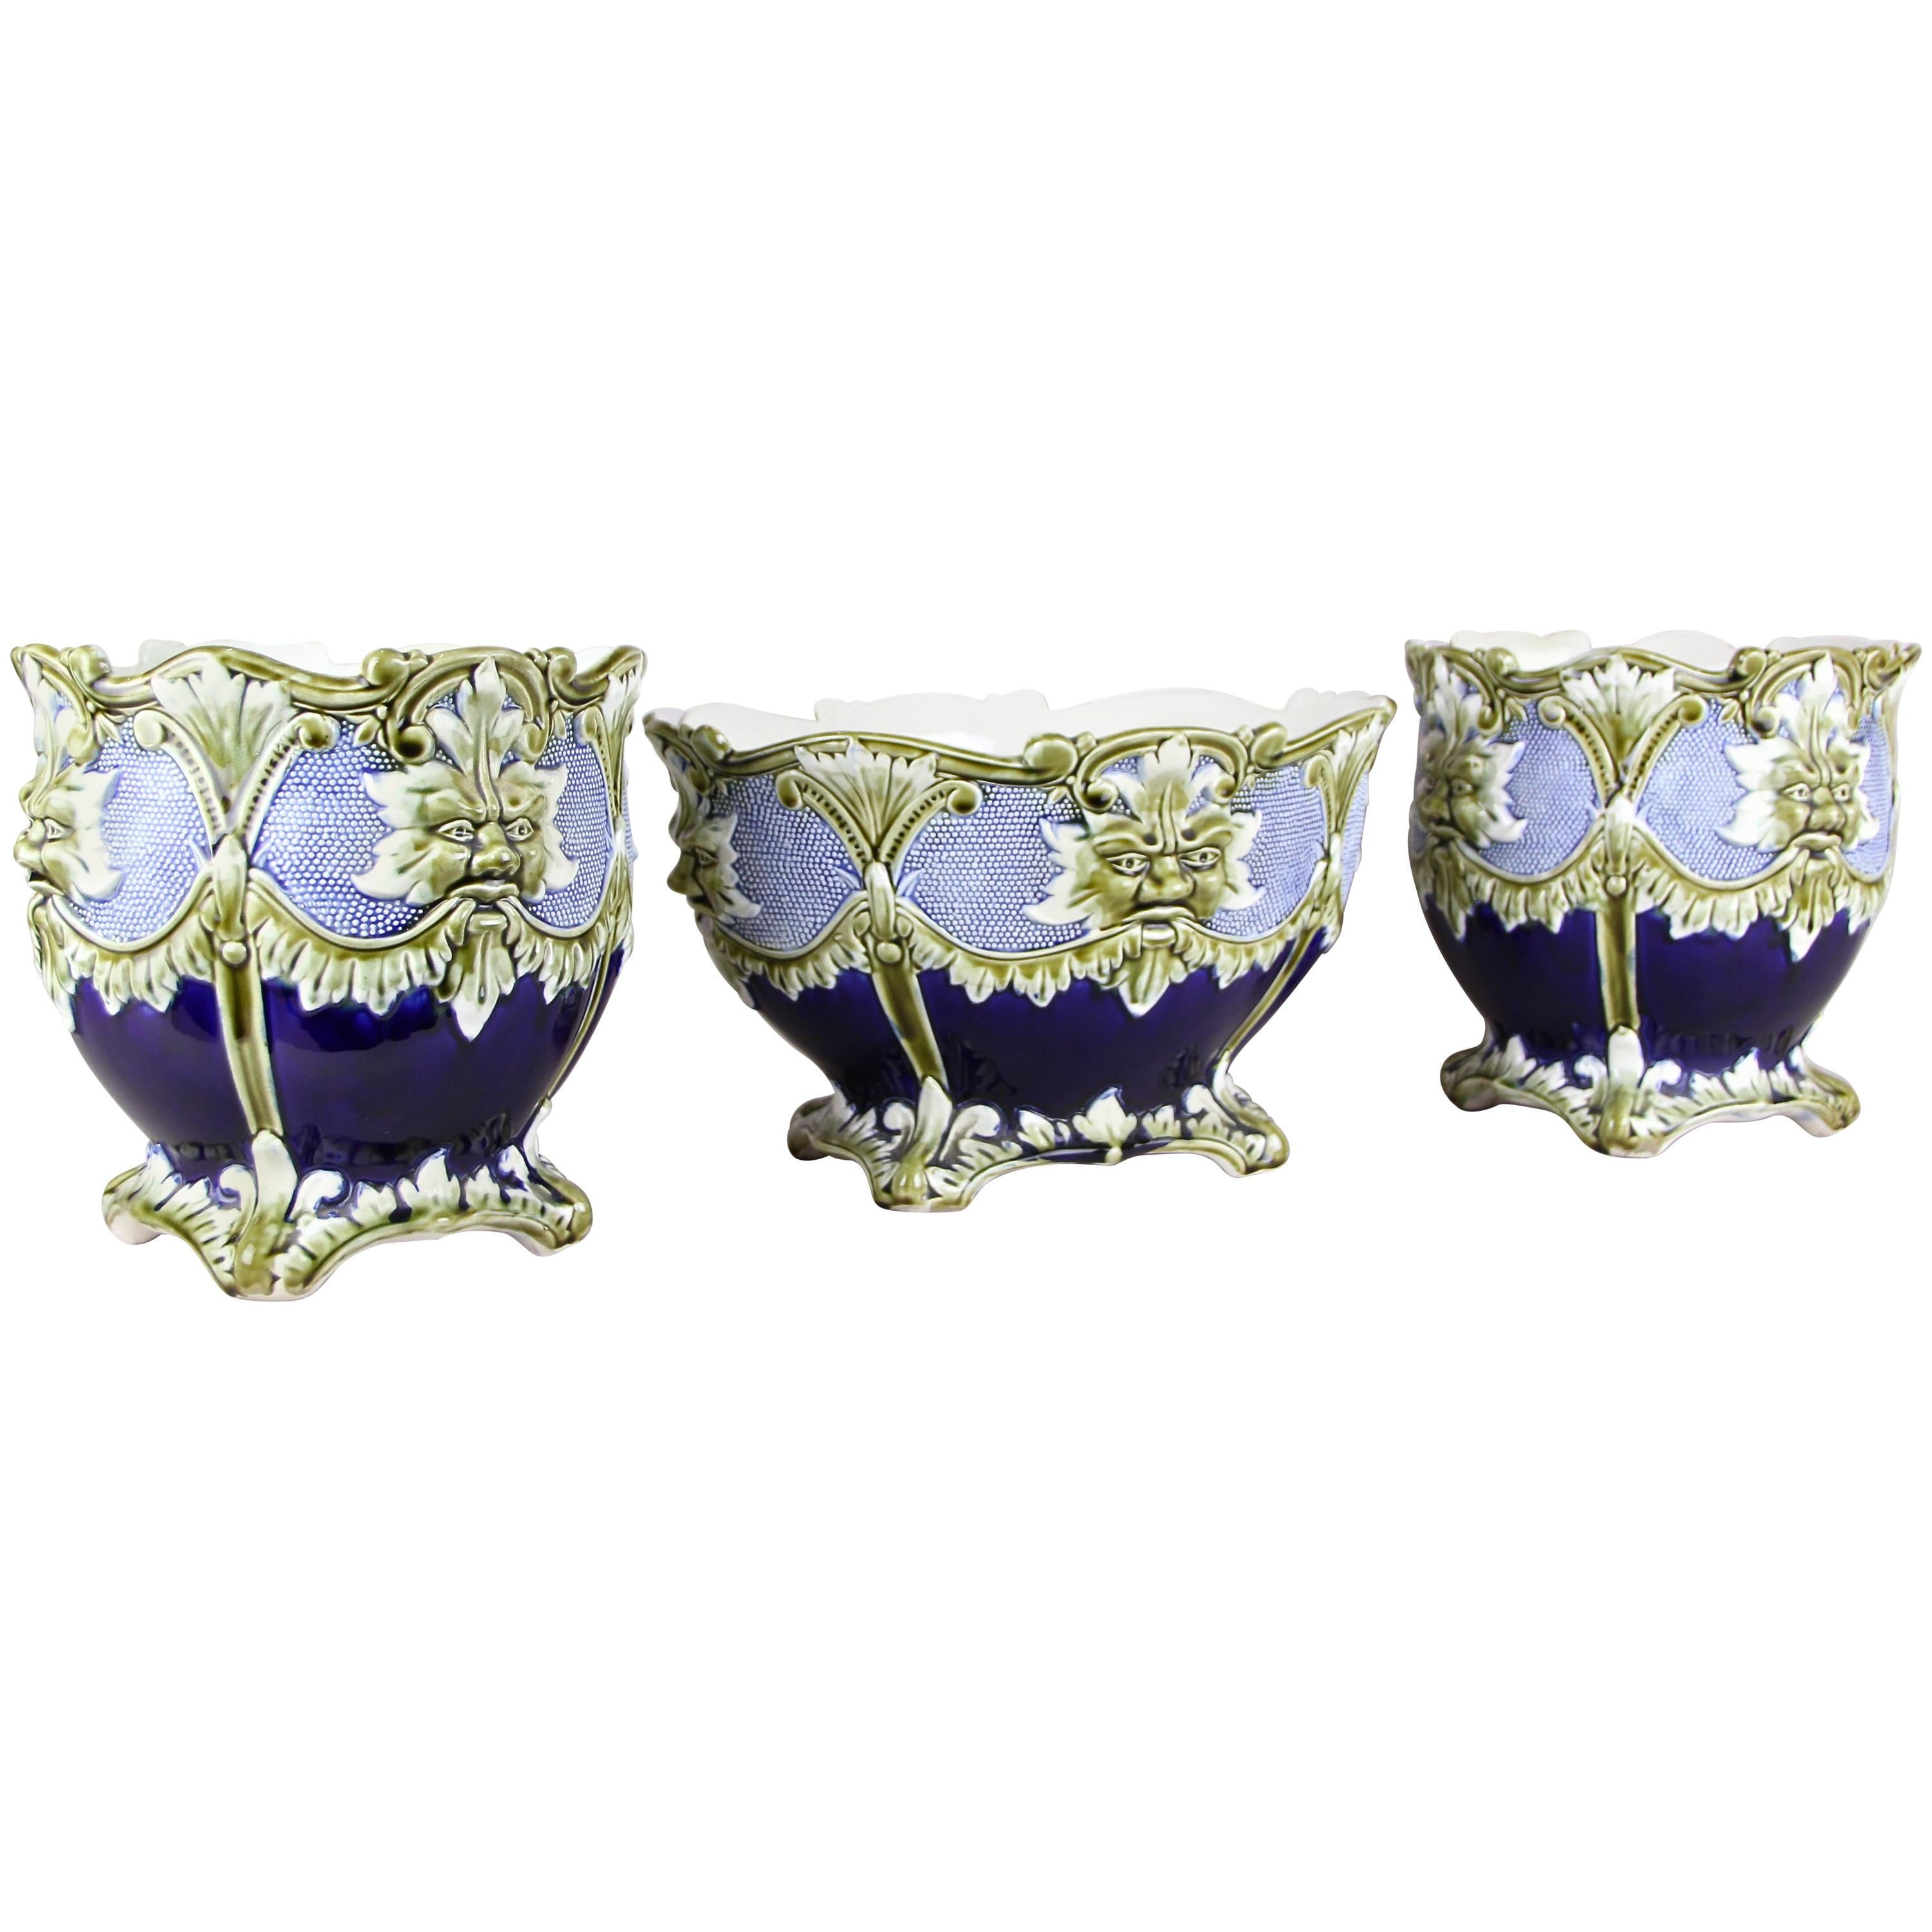 Beautiful Majolica cachepot set of three by J. Bernard De Bruyne. Made in the beginning of the 20th century by the well-known French manufactory, this very decorative cachepot set consists of two similar cachepots and a 